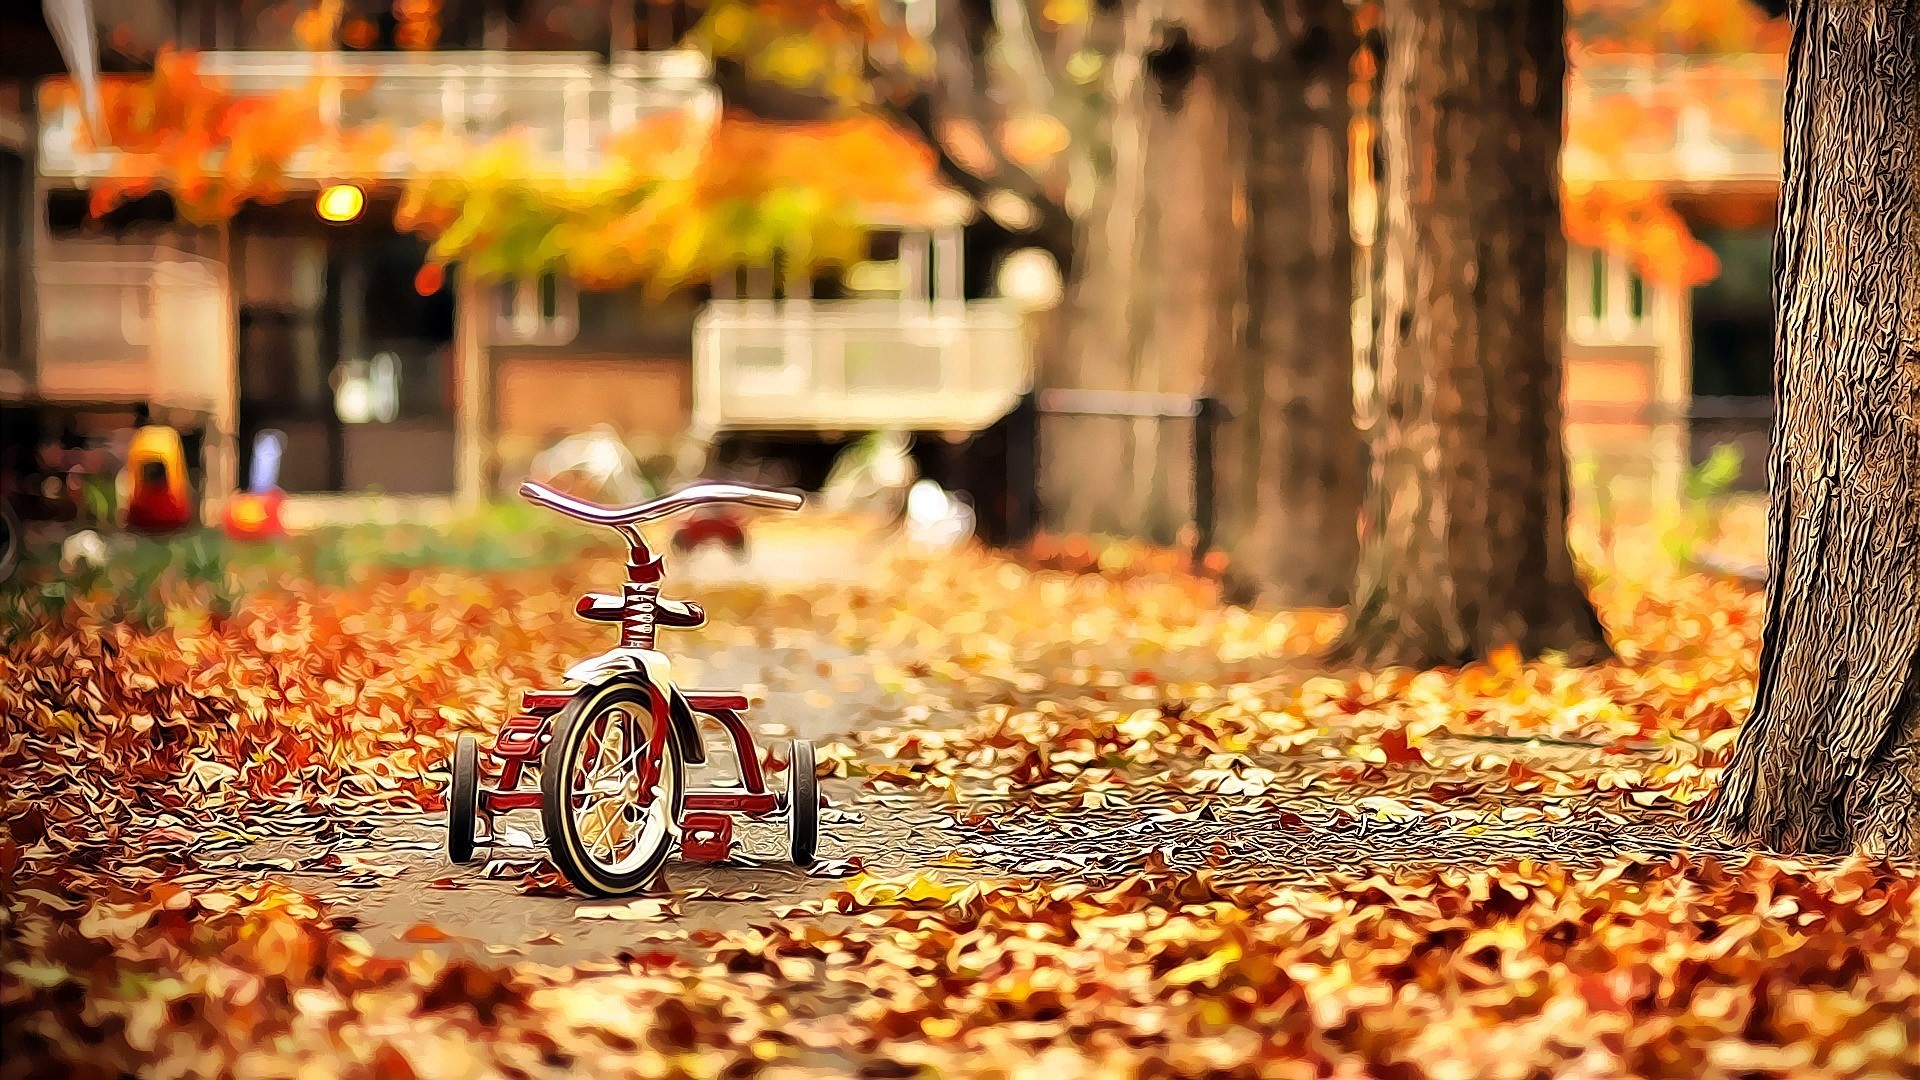 1920x1080 px fall background wallpaper free by Gable Gill